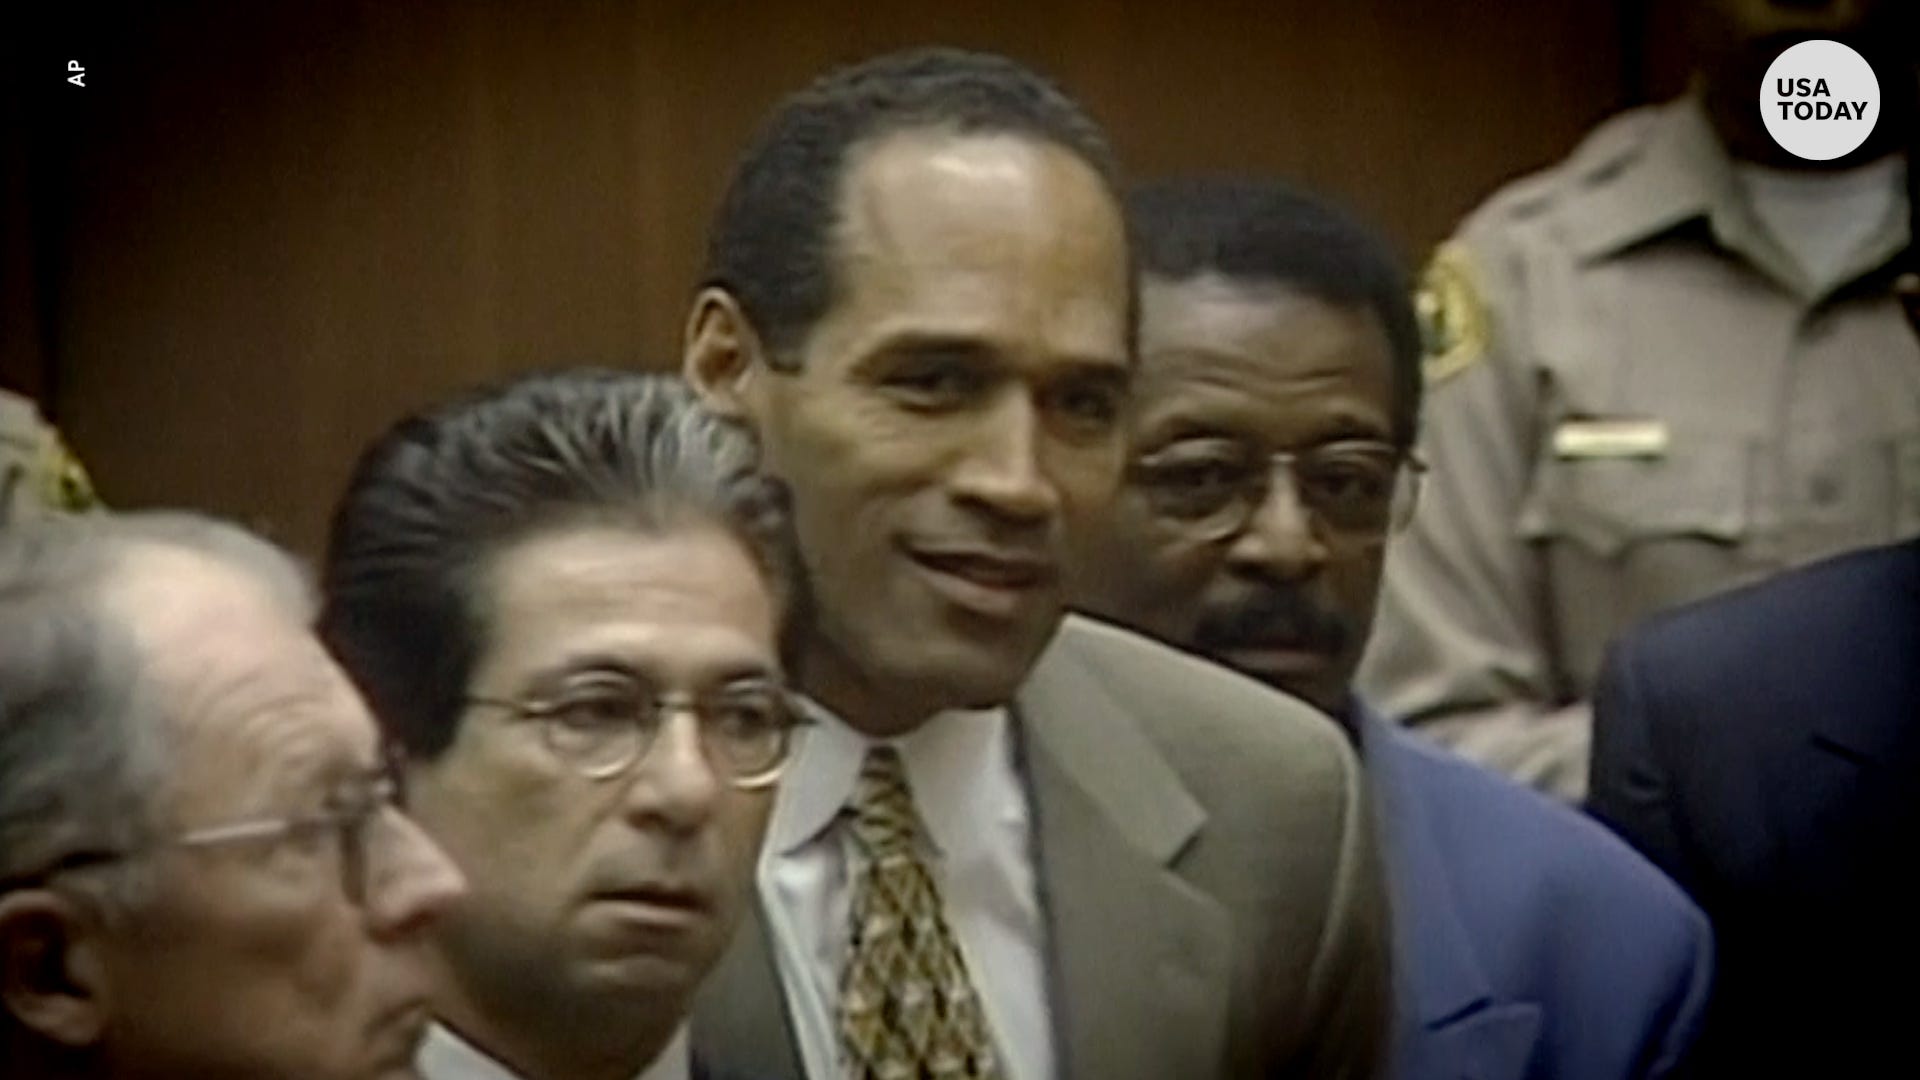 O J Simpson Living In No Negative Zone After Notorious Murder Cases